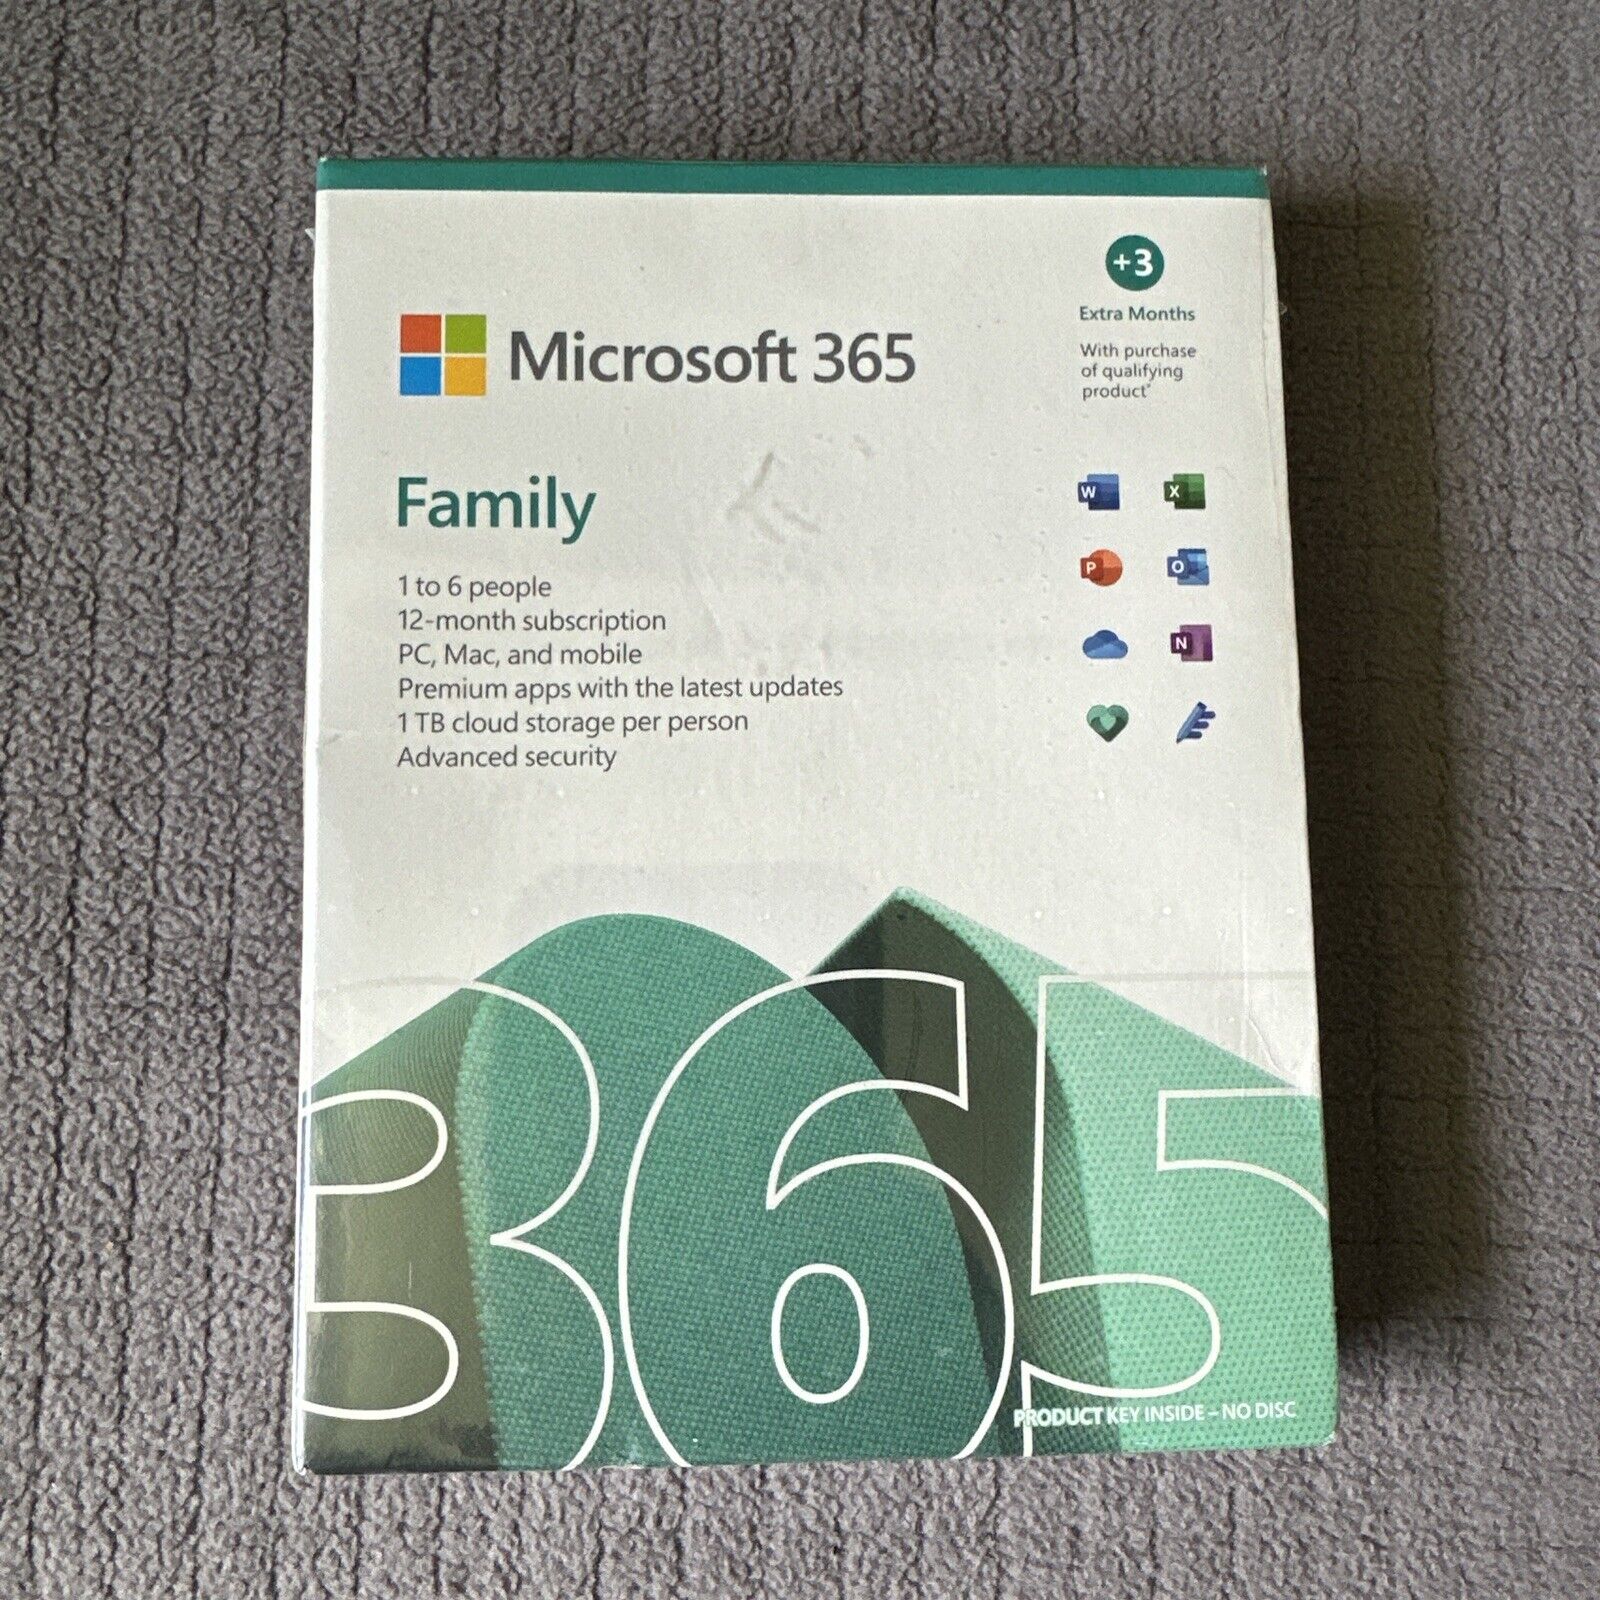 Microsoft 365 Family (One-Year, Up to 6 people) Brand New Sealed.